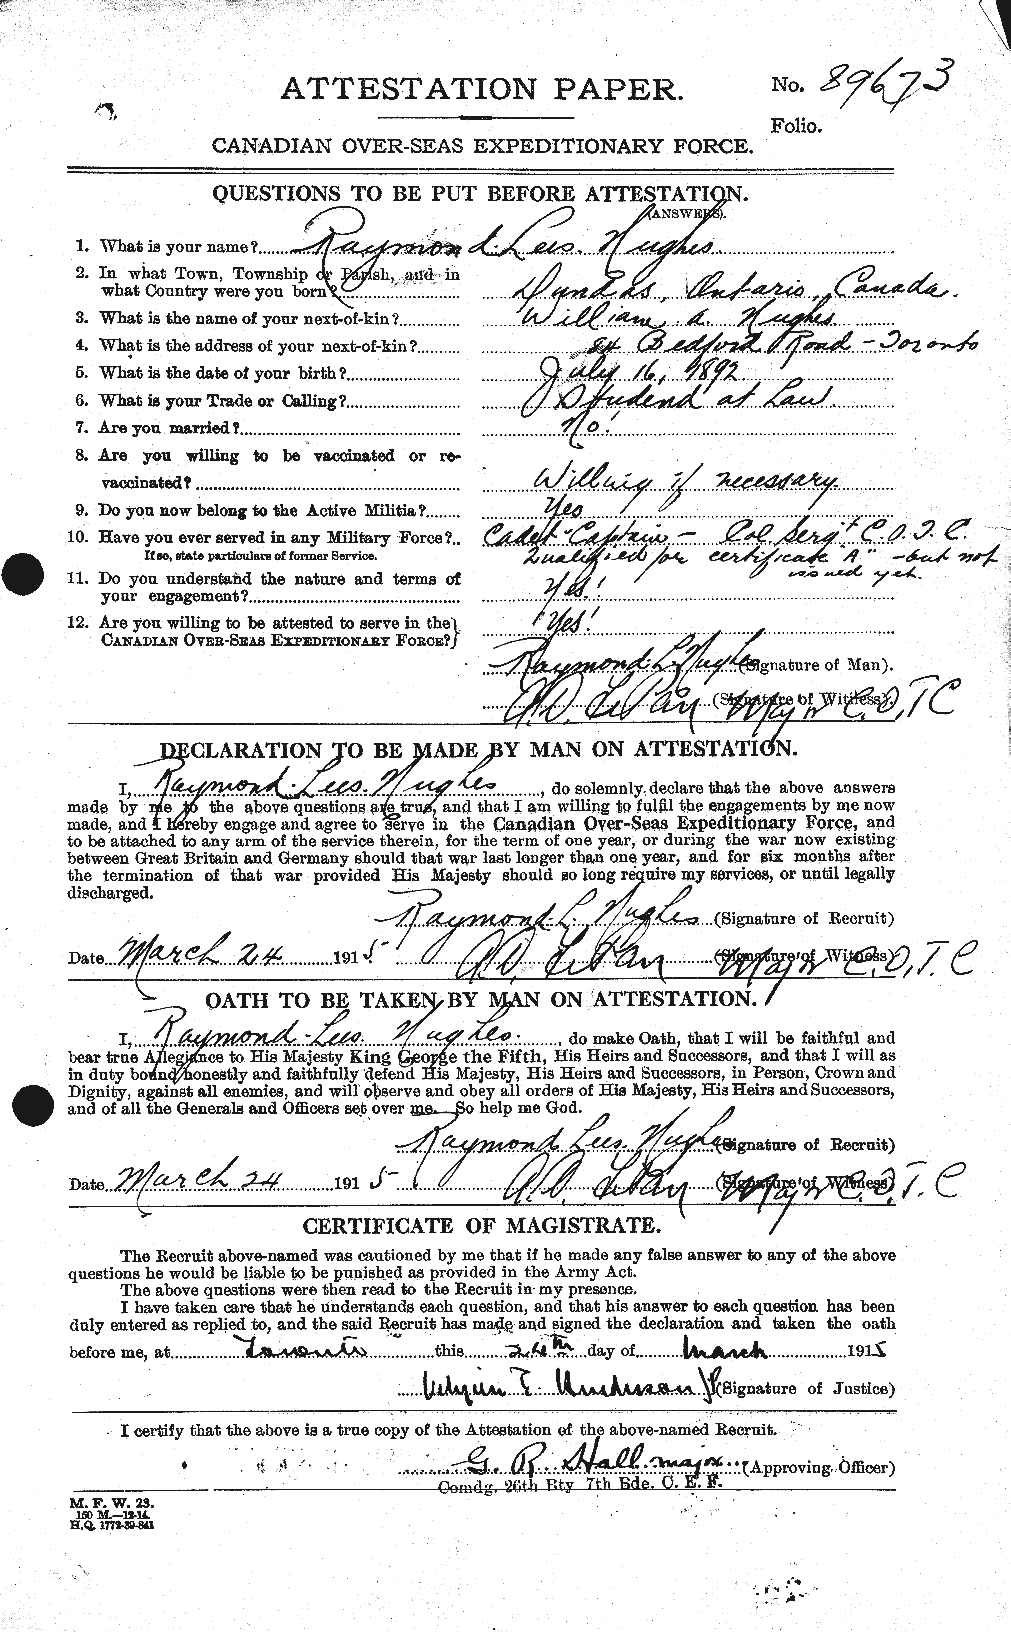 Personnel Records of the First World War - CEF 404173a